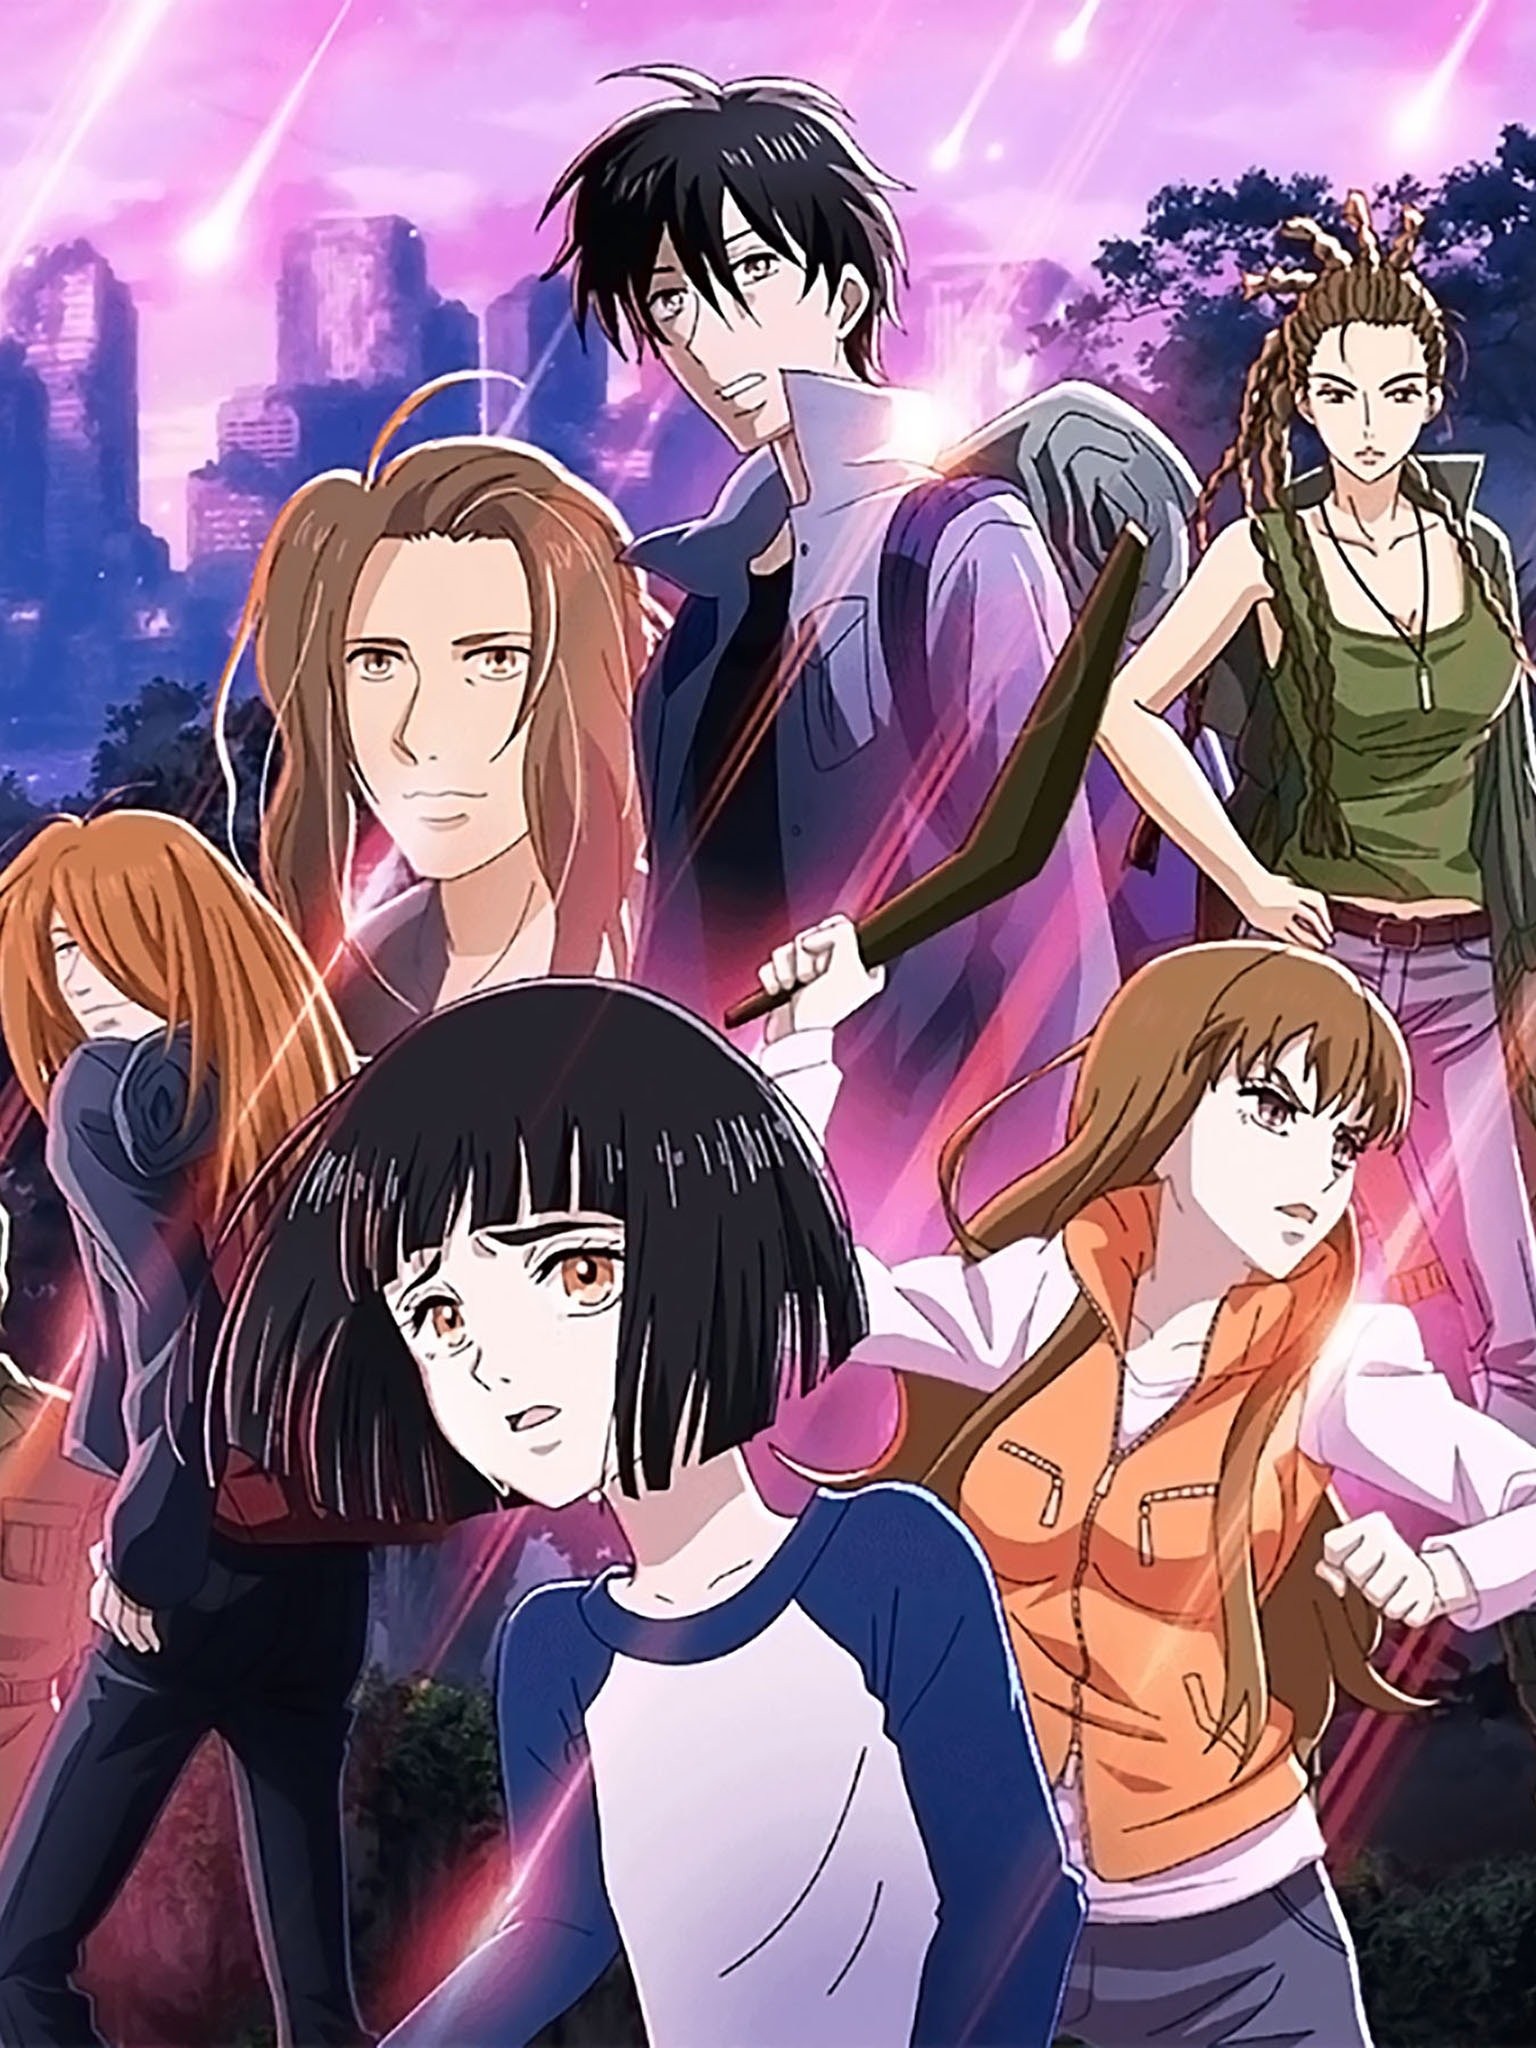 First (and Second) Impressions - 7Seeds - Lost in Anime